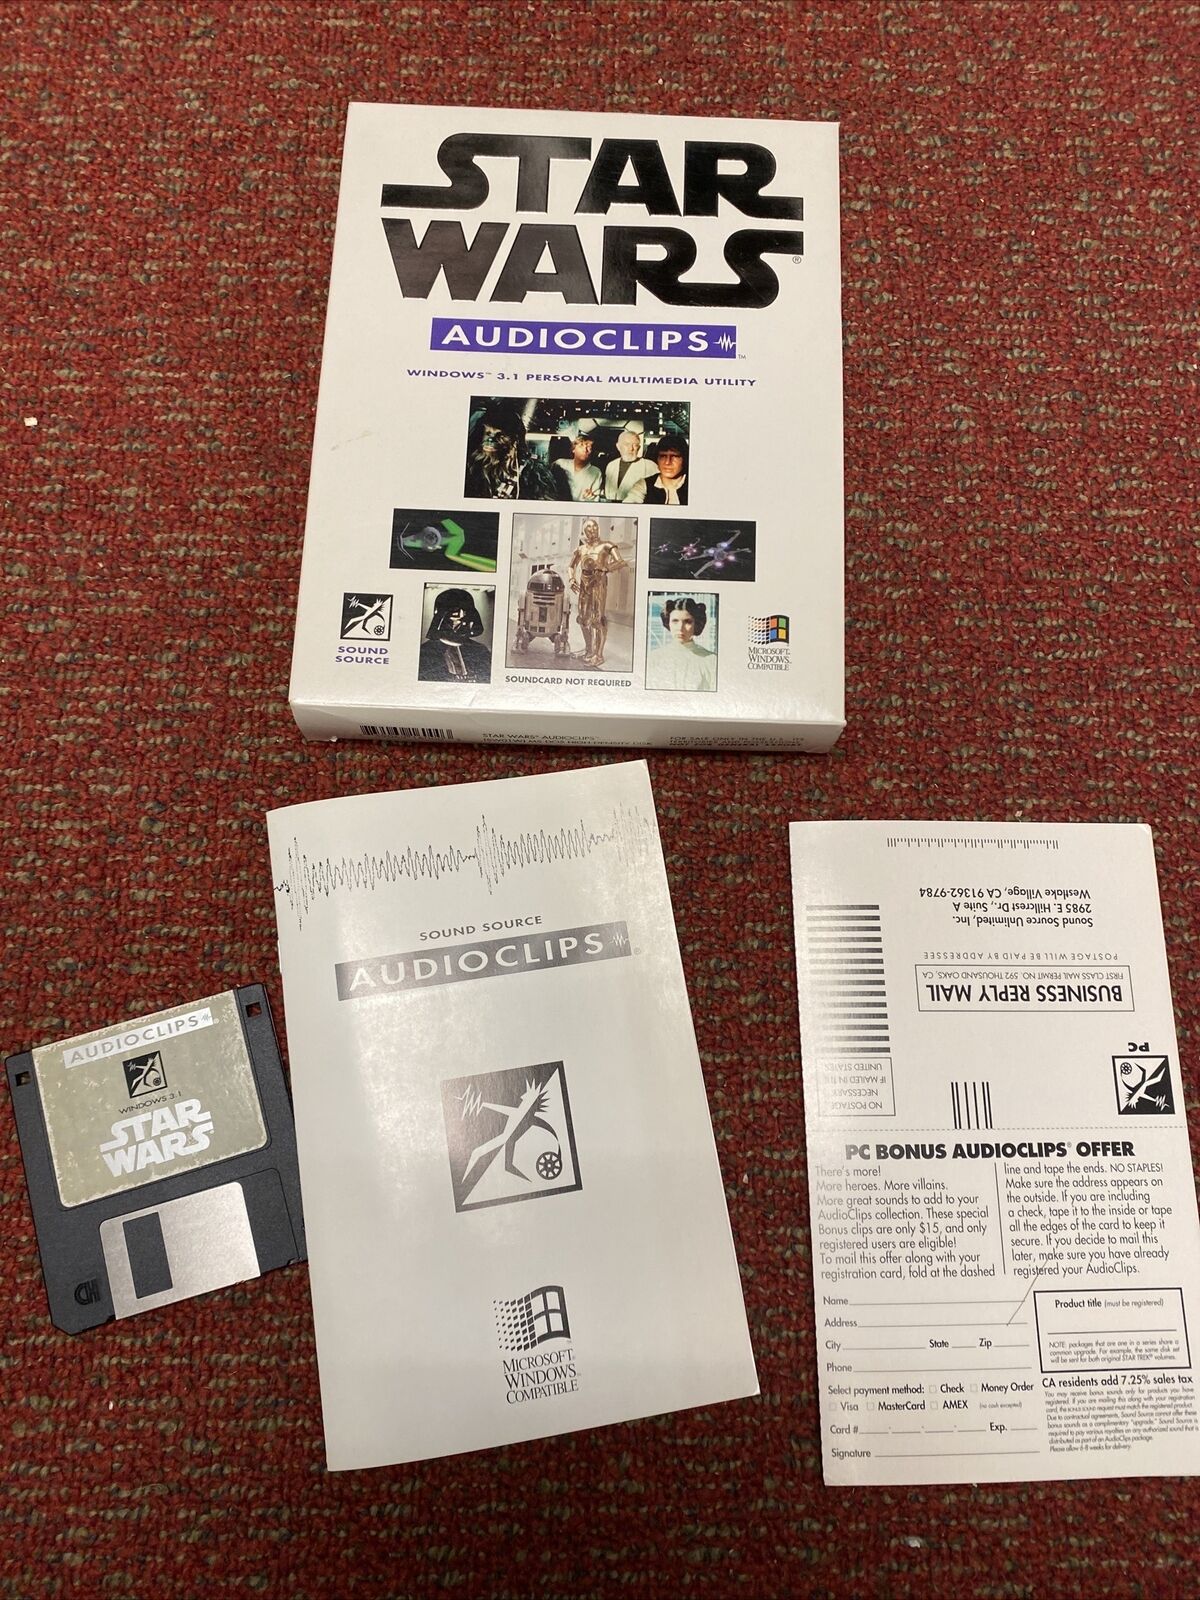 Star Wars Audio clips For Pc Windows 3.1 On 3.5” Floppy Big Box By Sound Source